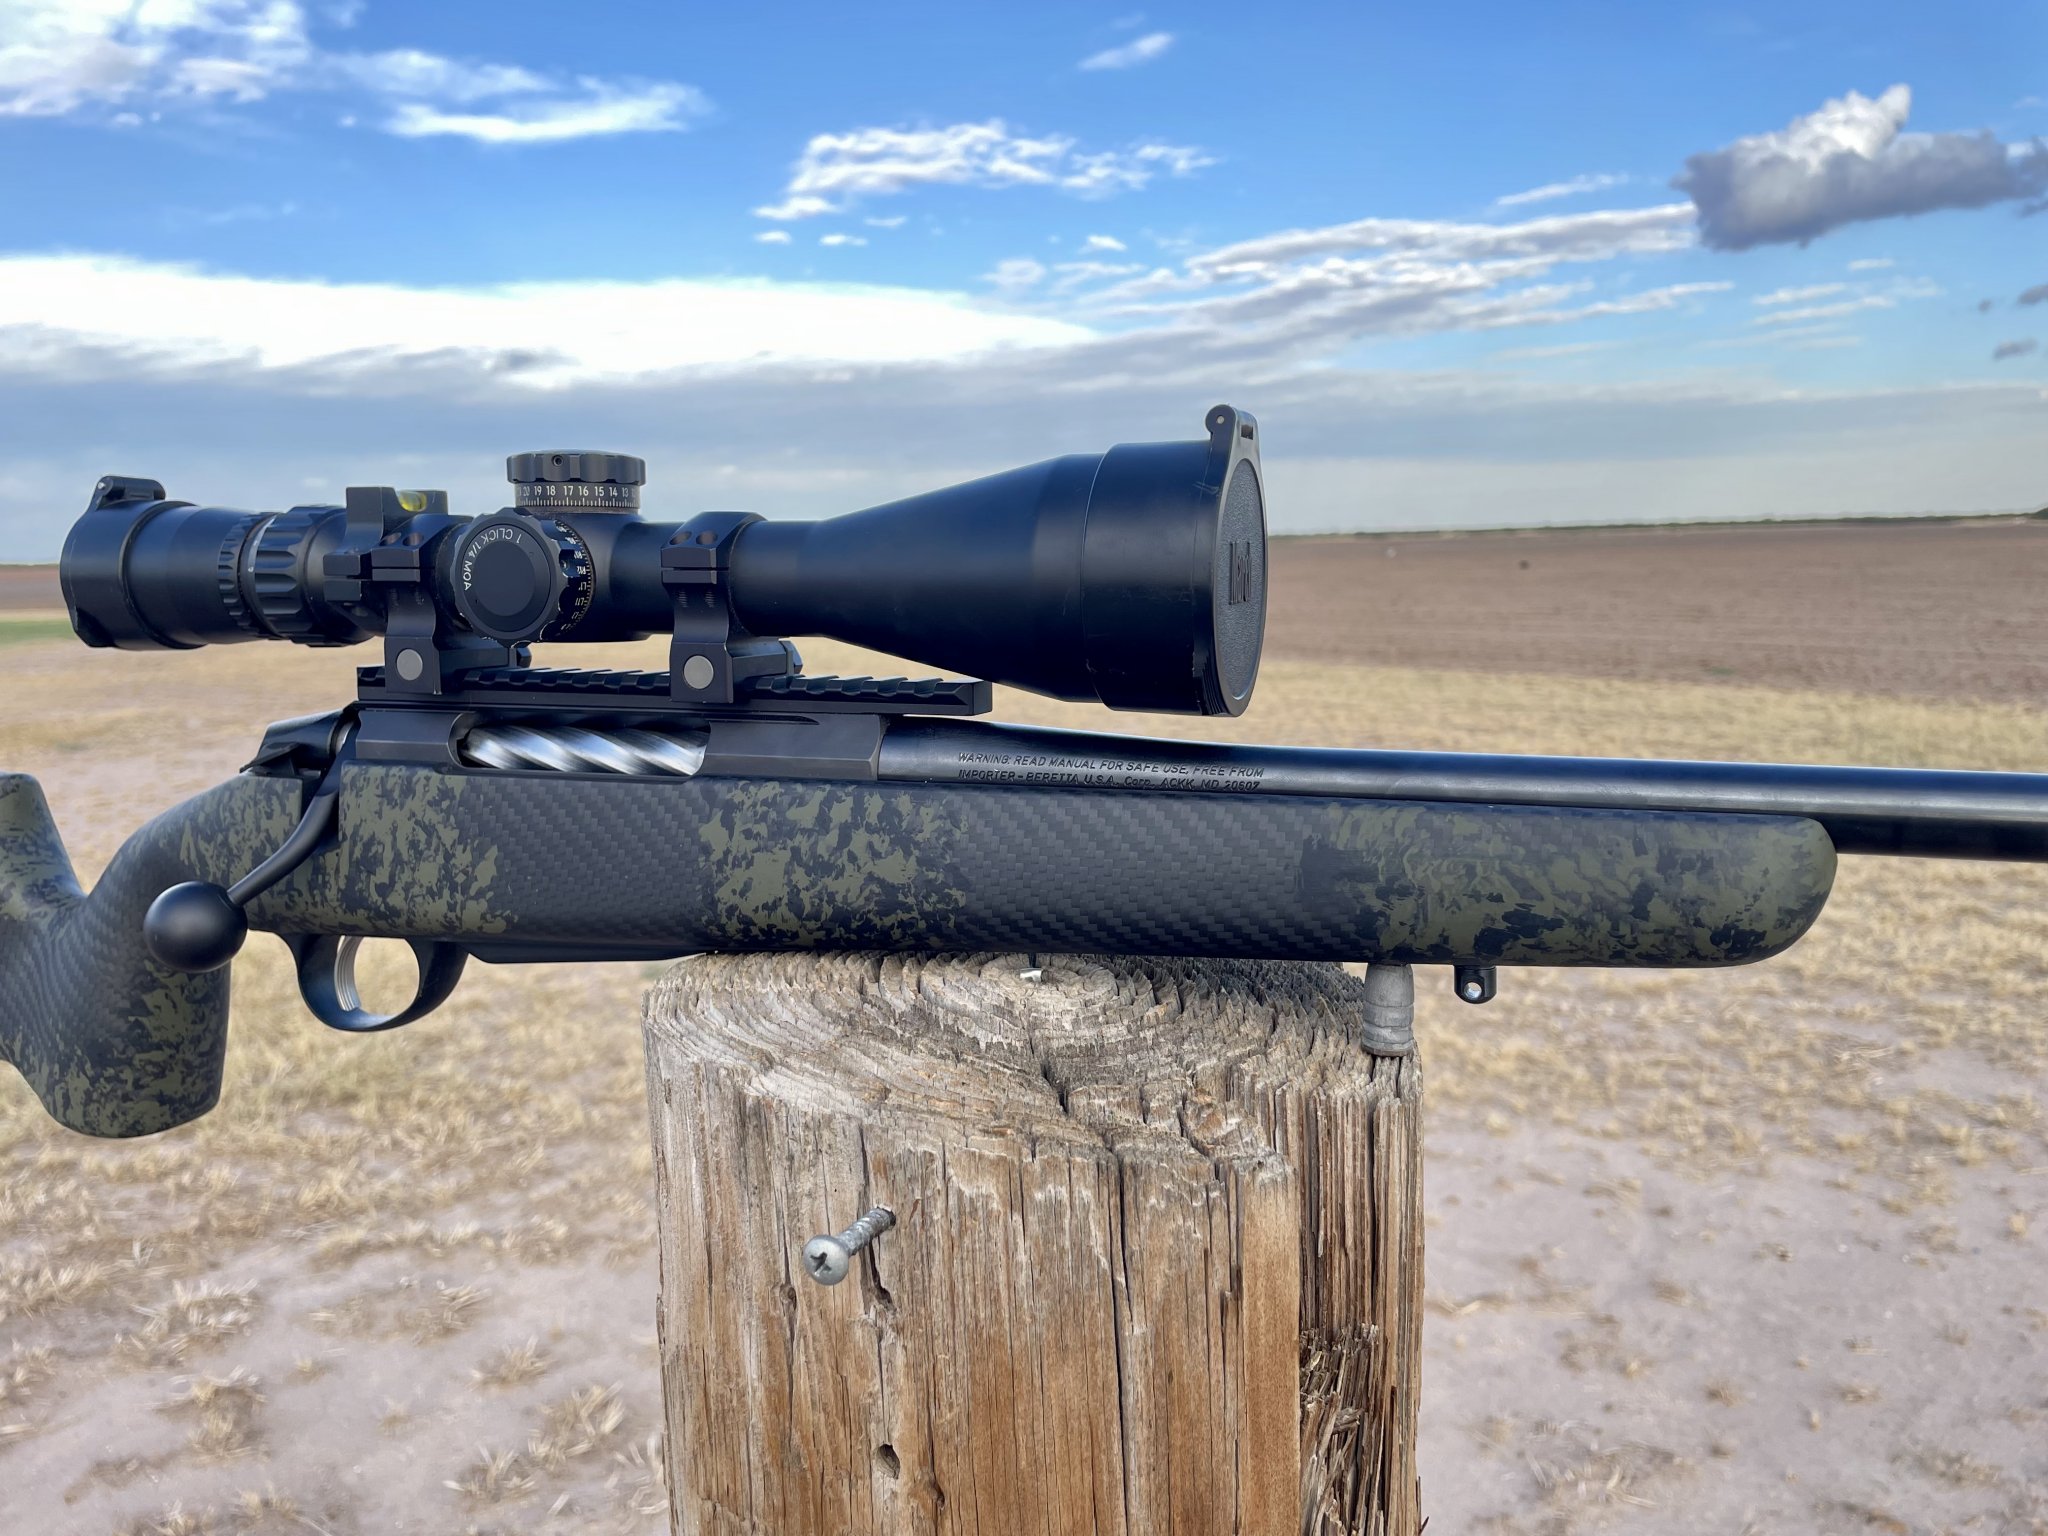 16-18 inch shorty rifles | Page 63 | Sniper's Hide Forum